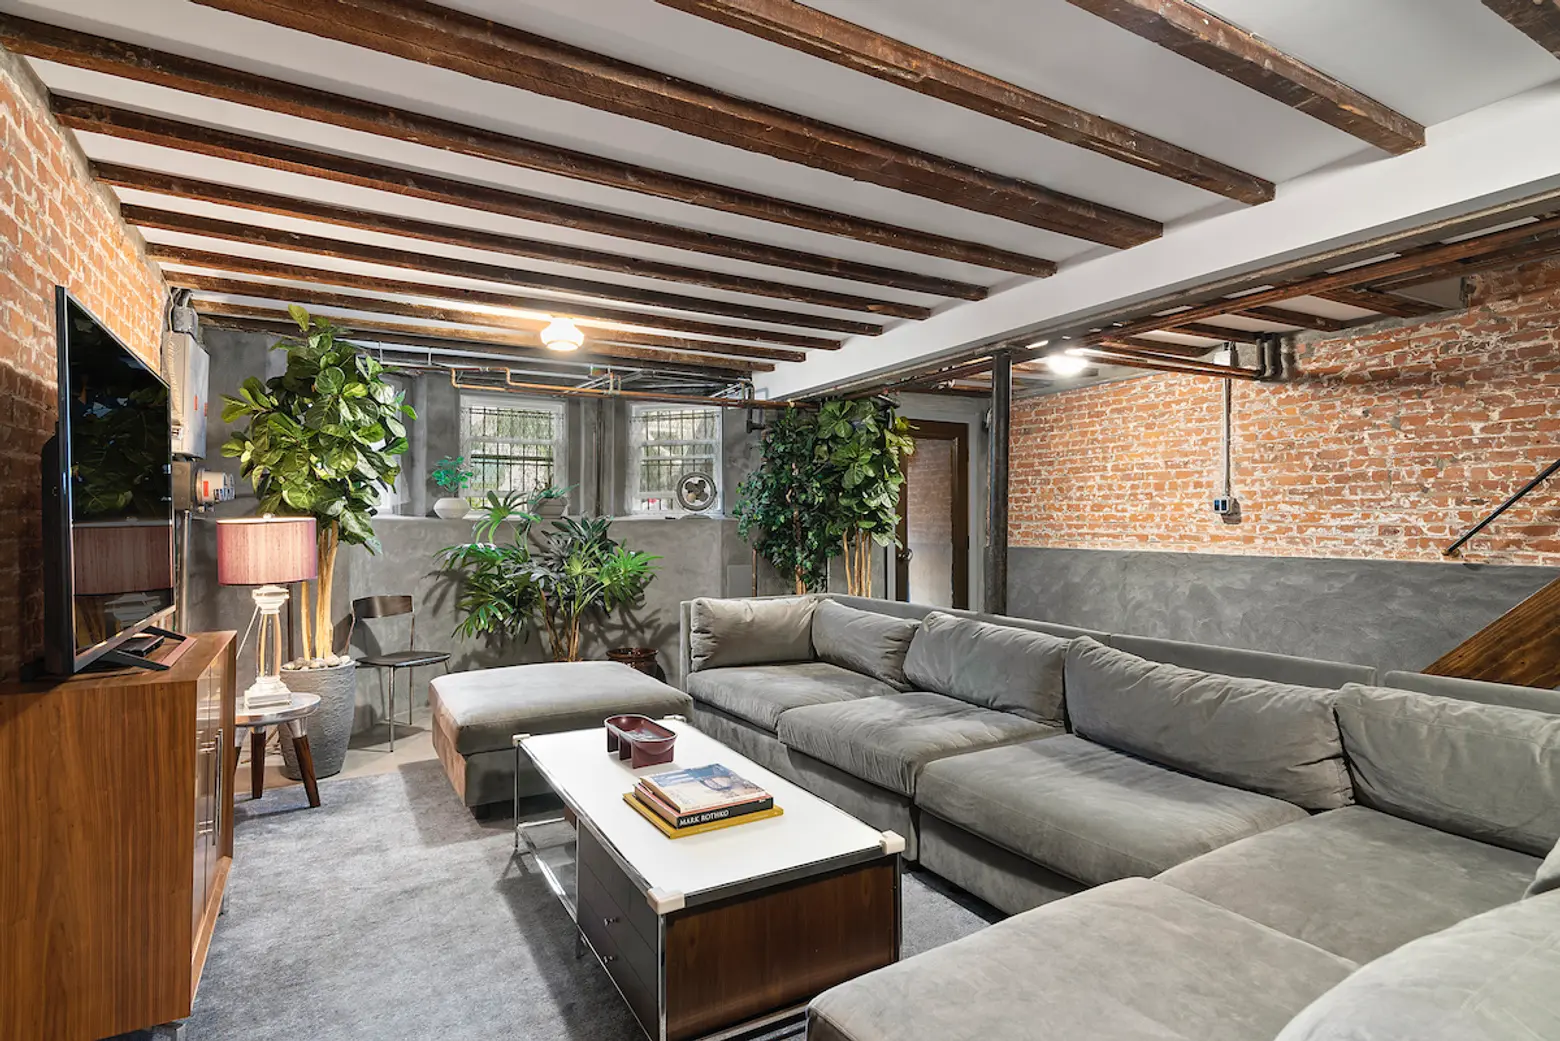 996 Saint Johns Place, crown heights, cool listings, townhouses